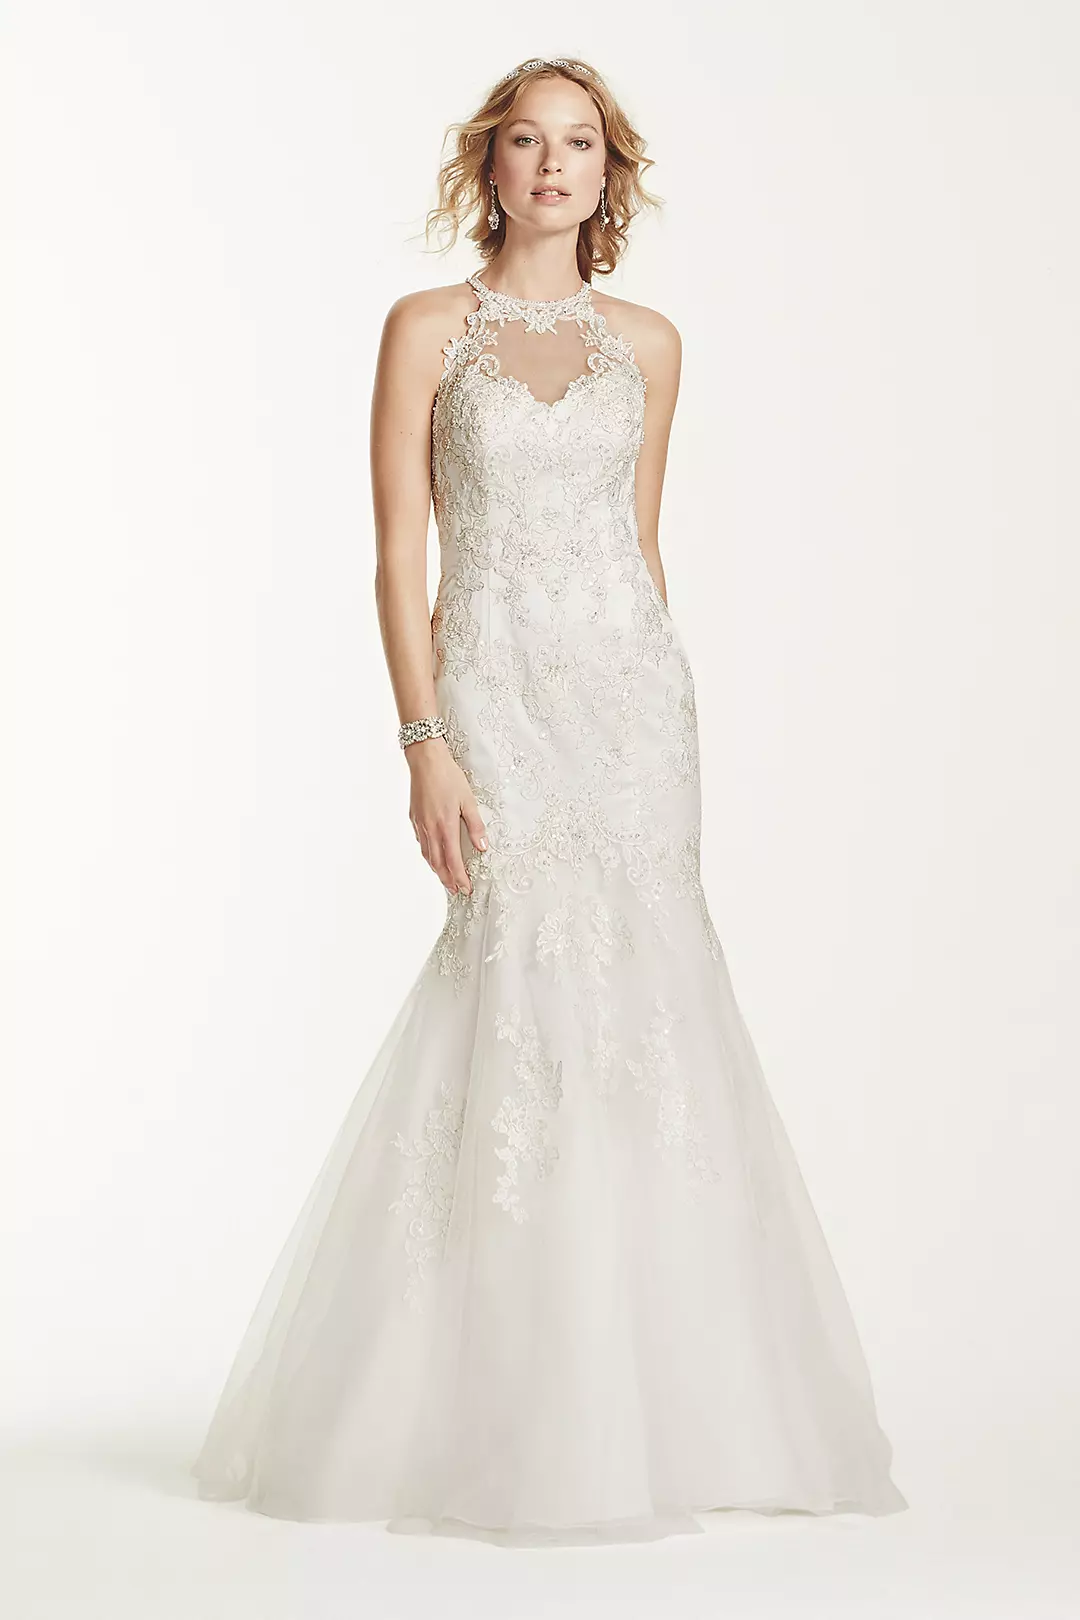 As-Is Lace and Tulle Petite Wedding Dress Image